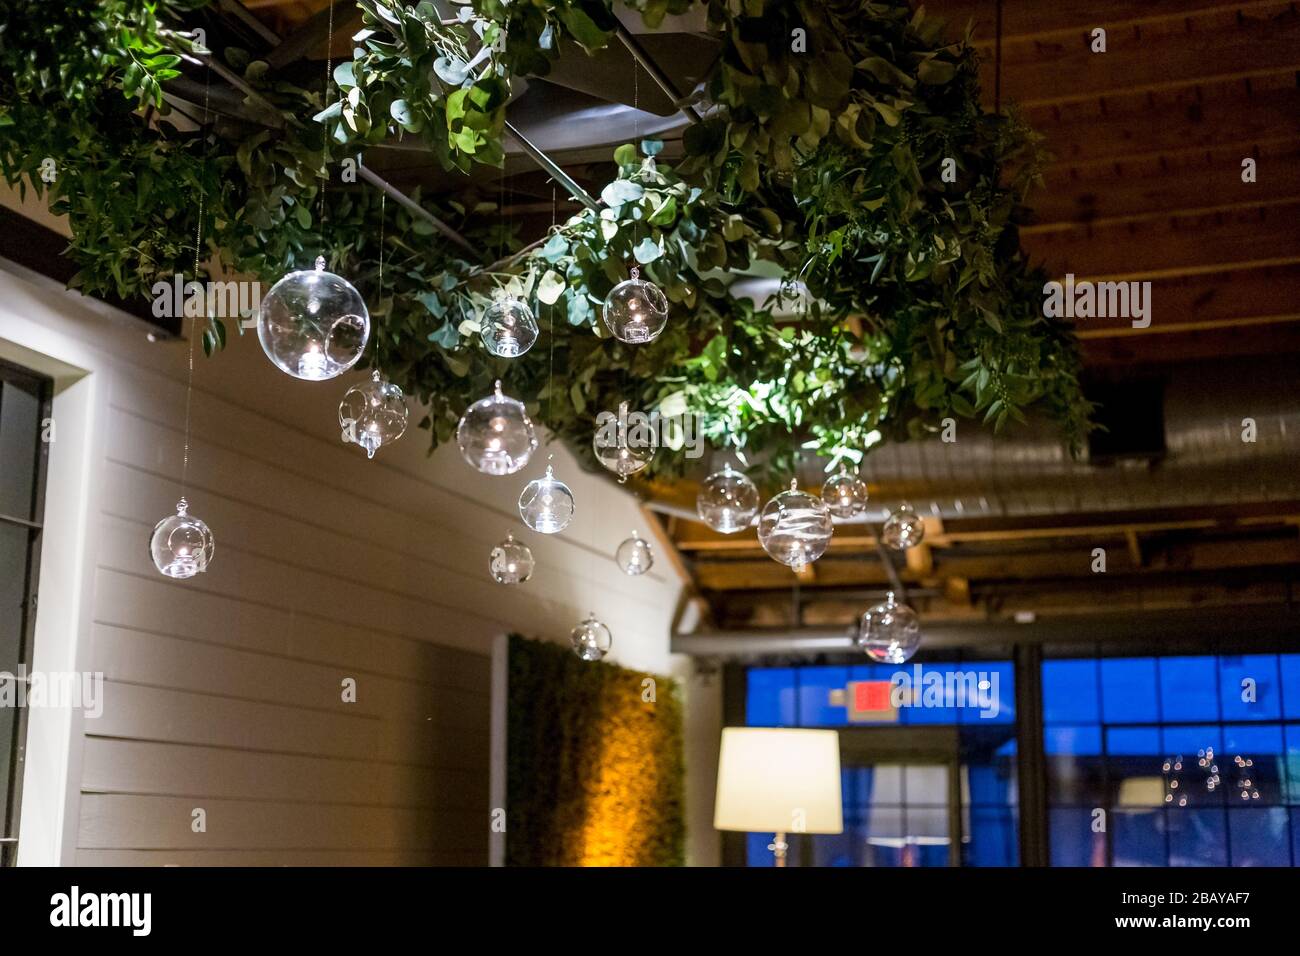 Low angle shot of round glass chandeliers hanging from the floral ceiling Stock Photo